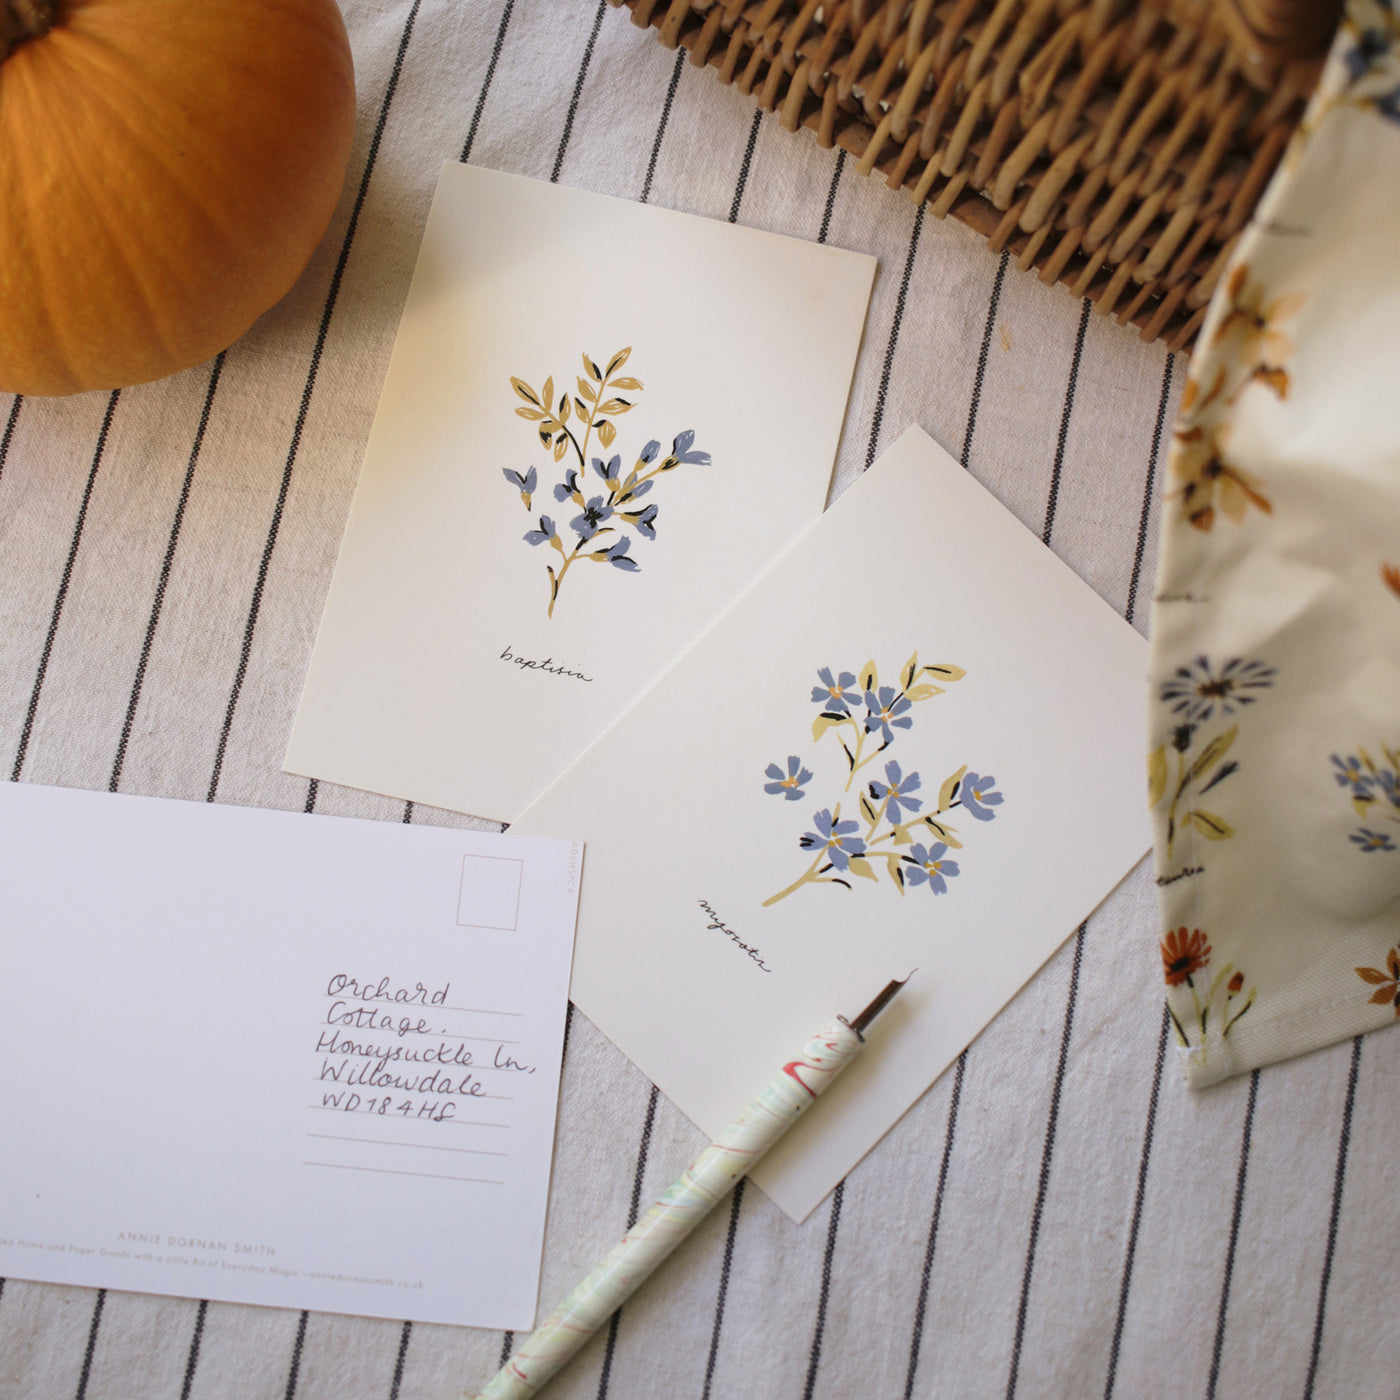 blue floral postcards on a striped linen tablecloth